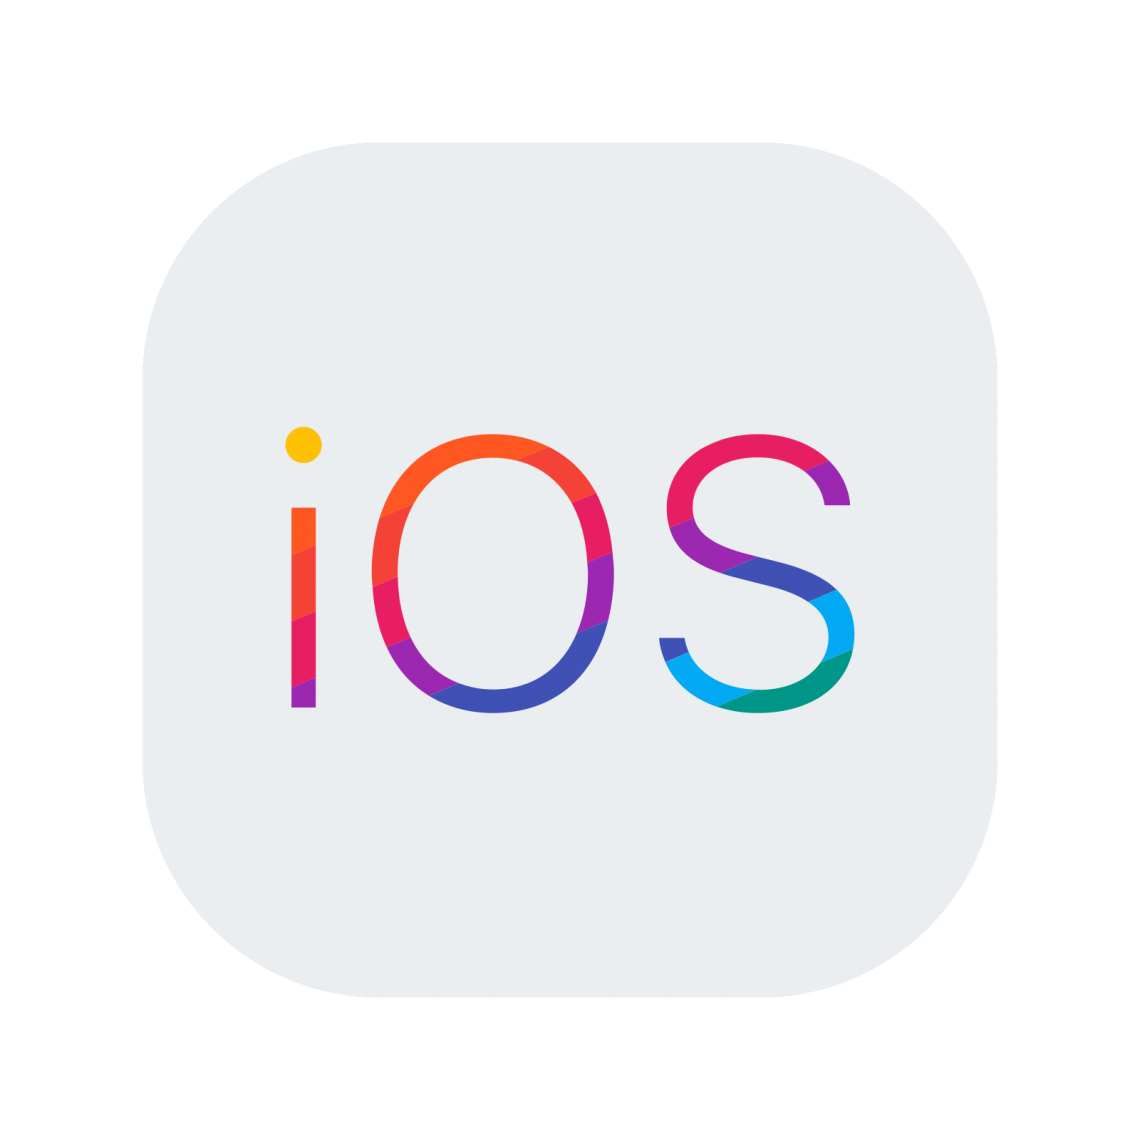 Download Apple Network Icons Ios Computer Iphone Graphics HQ PNG Image | FreePNGImg